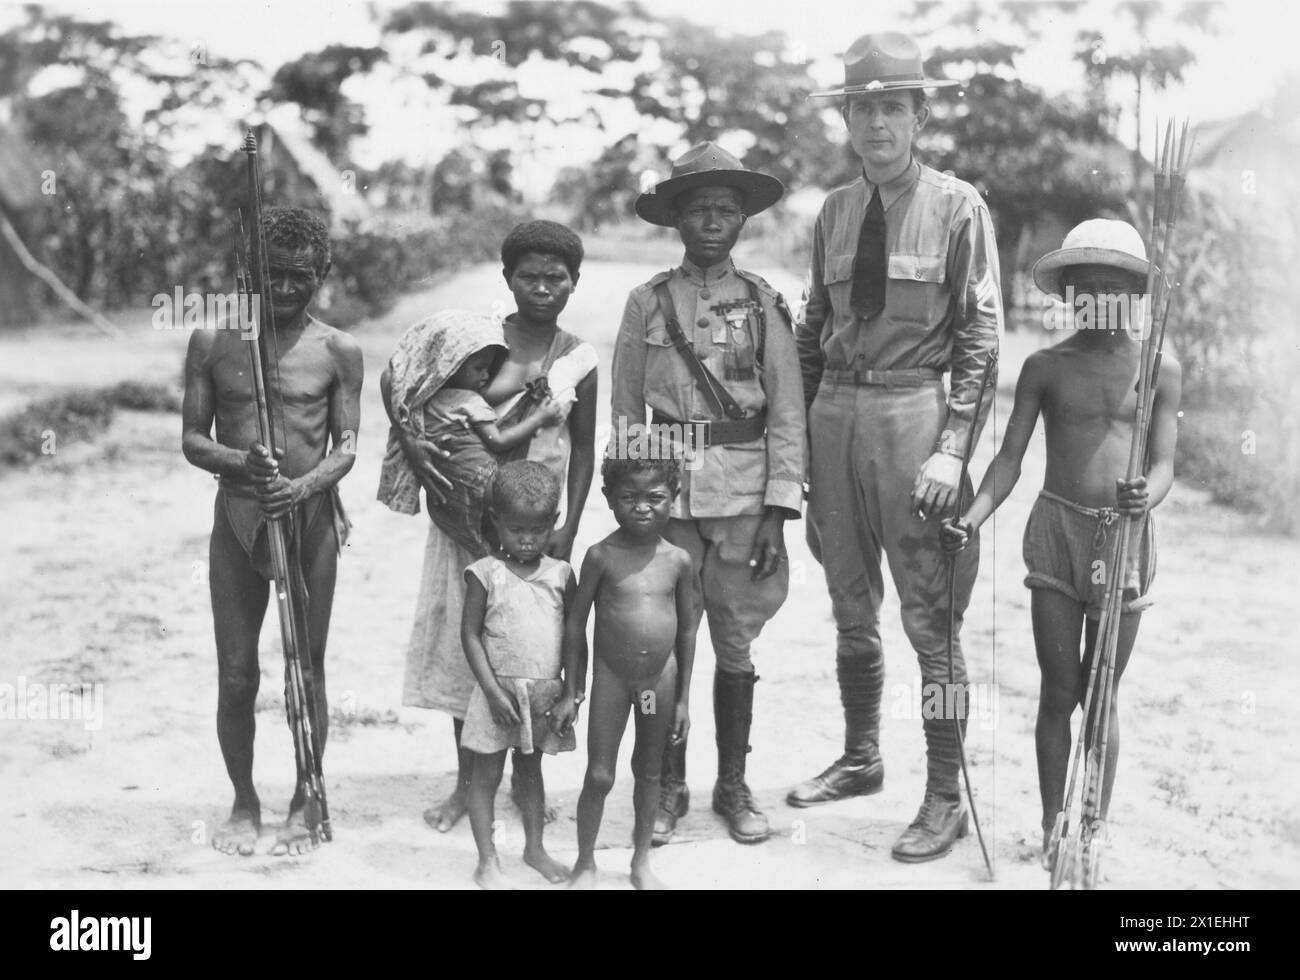 Negritos of Pampanga, Philippine Islands Staff Sgt. Charles H. Cobb, 10th Signal Service Co; King Alfonso, and members of Latin tribe, showing relative size in stature between an American of average height and mature pygmies. Margot, Pampanga Province, Philippine Islands, May 28, 1931 Stock Photo